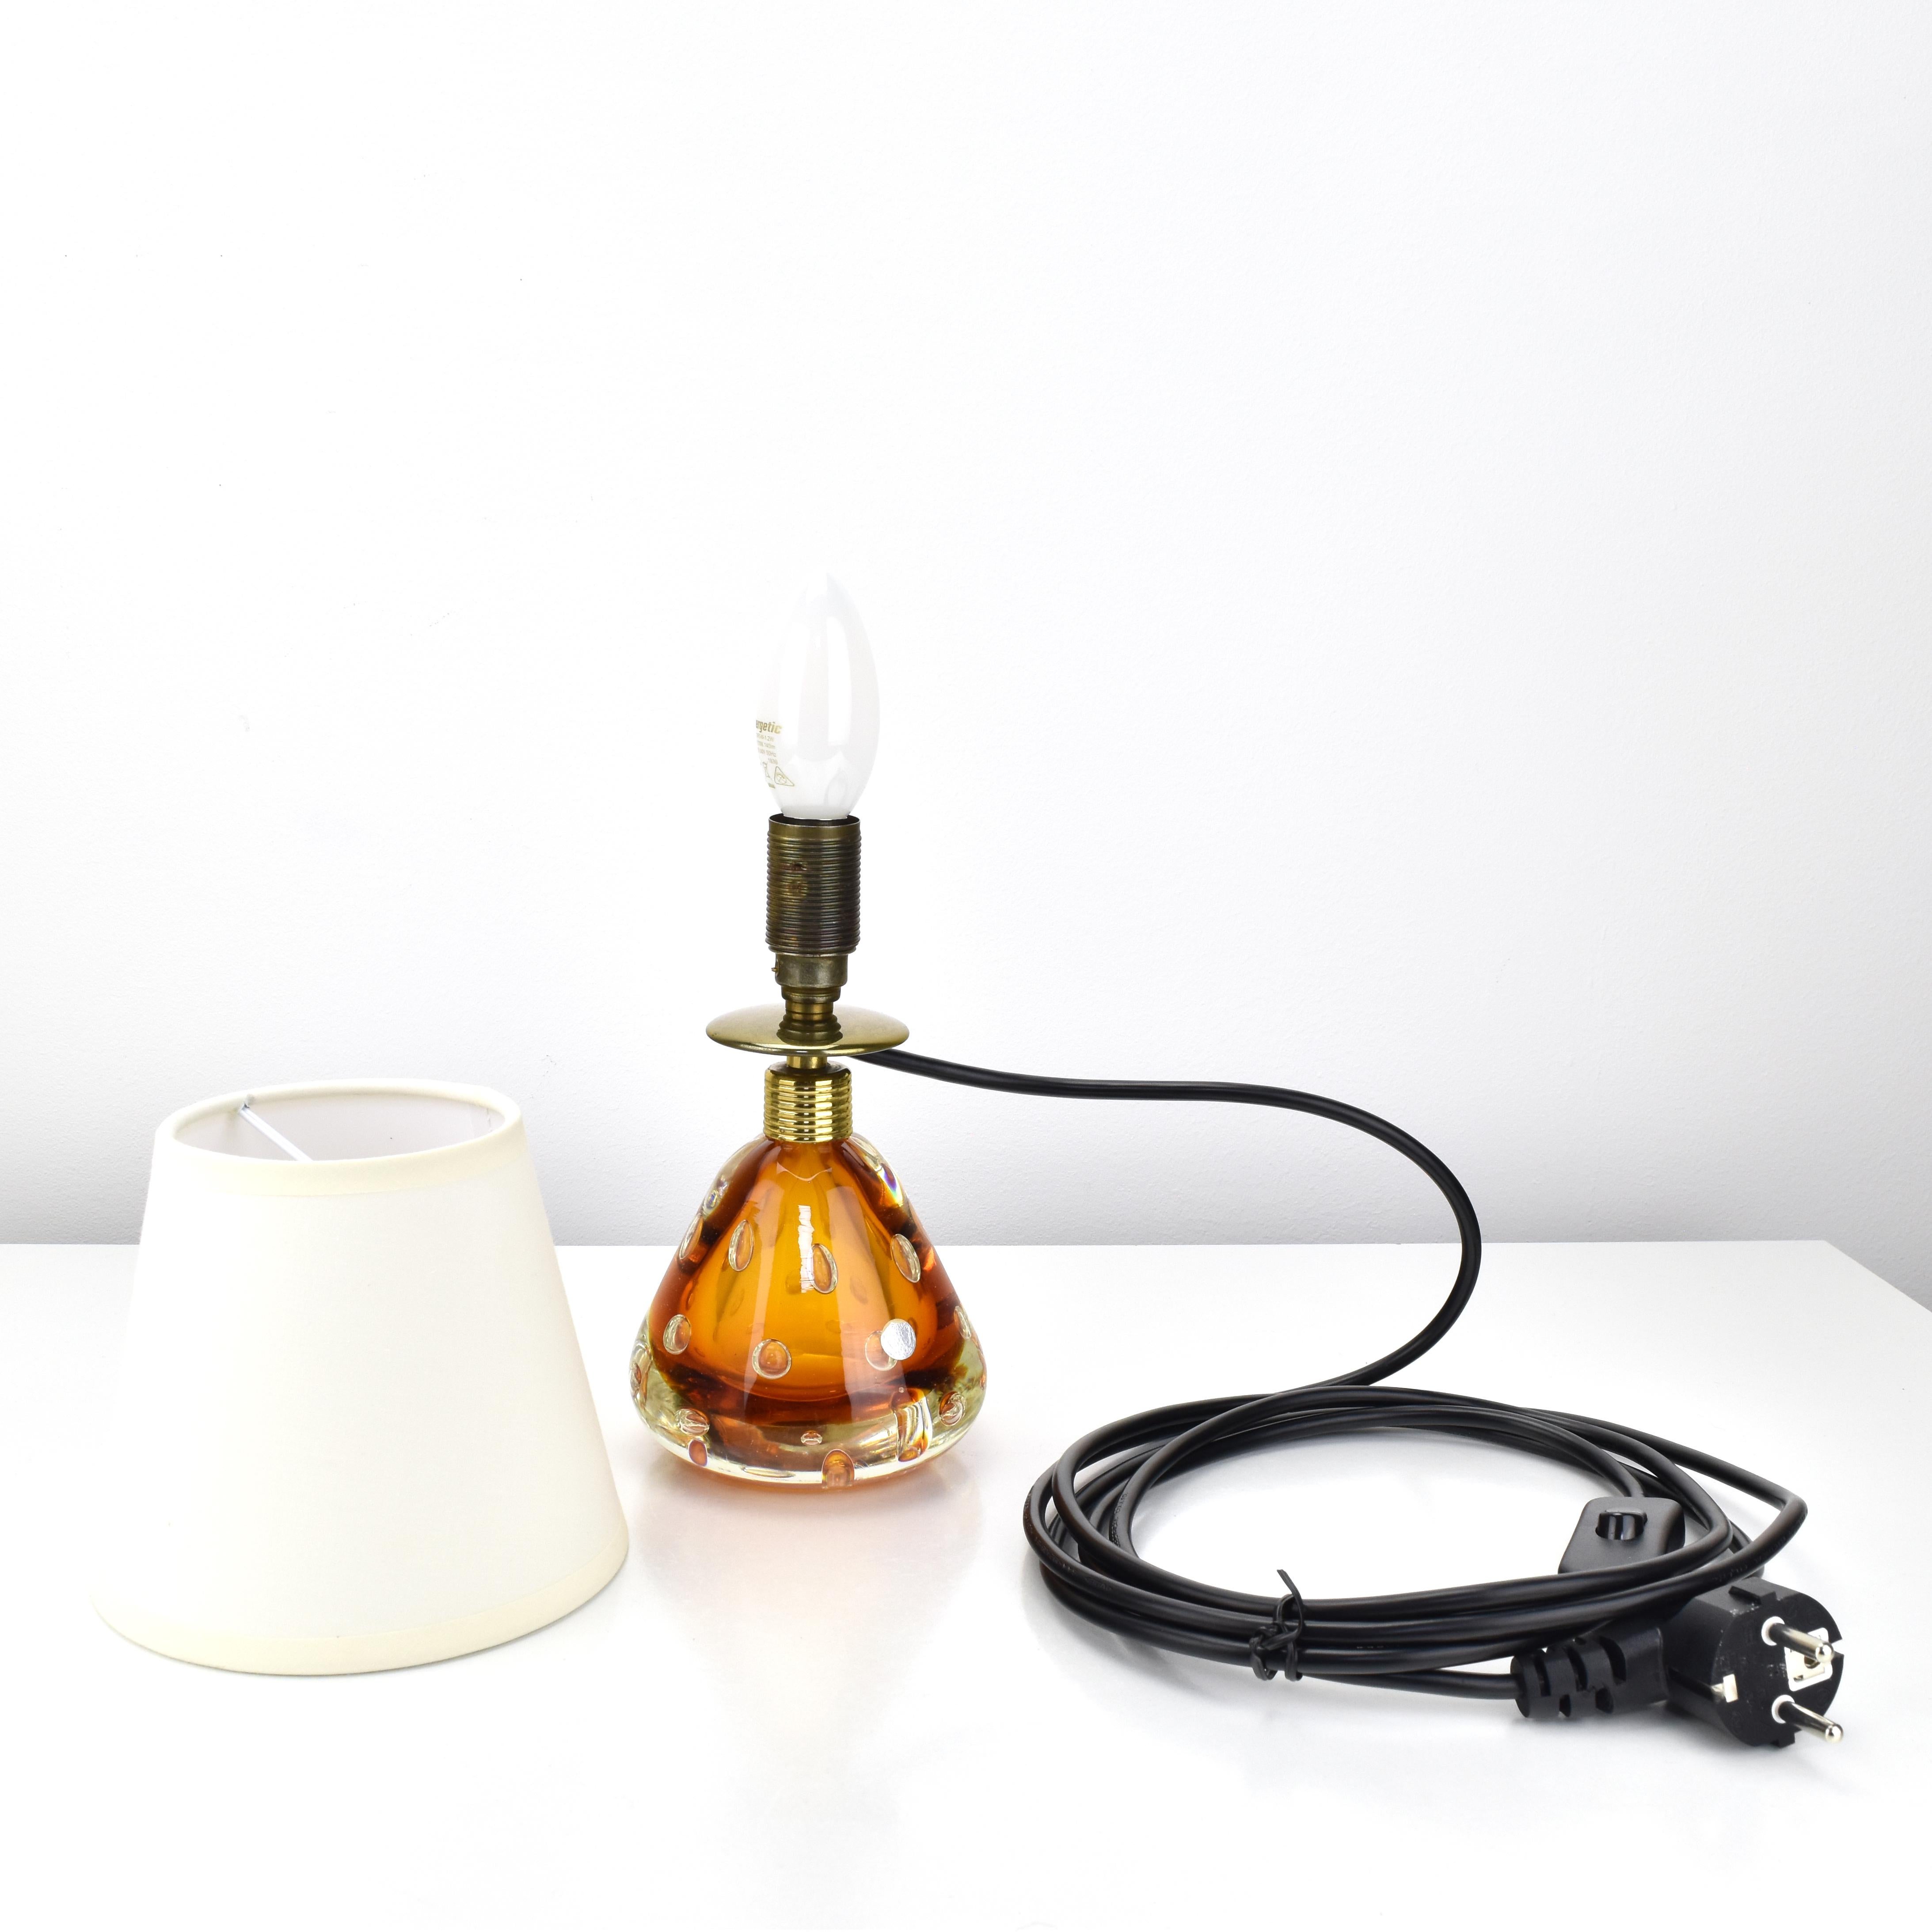 Fait main Pietro Toso for Fratelli Toso Murano Sommerso Amber Art Glass Table Lamp 1950s en vente